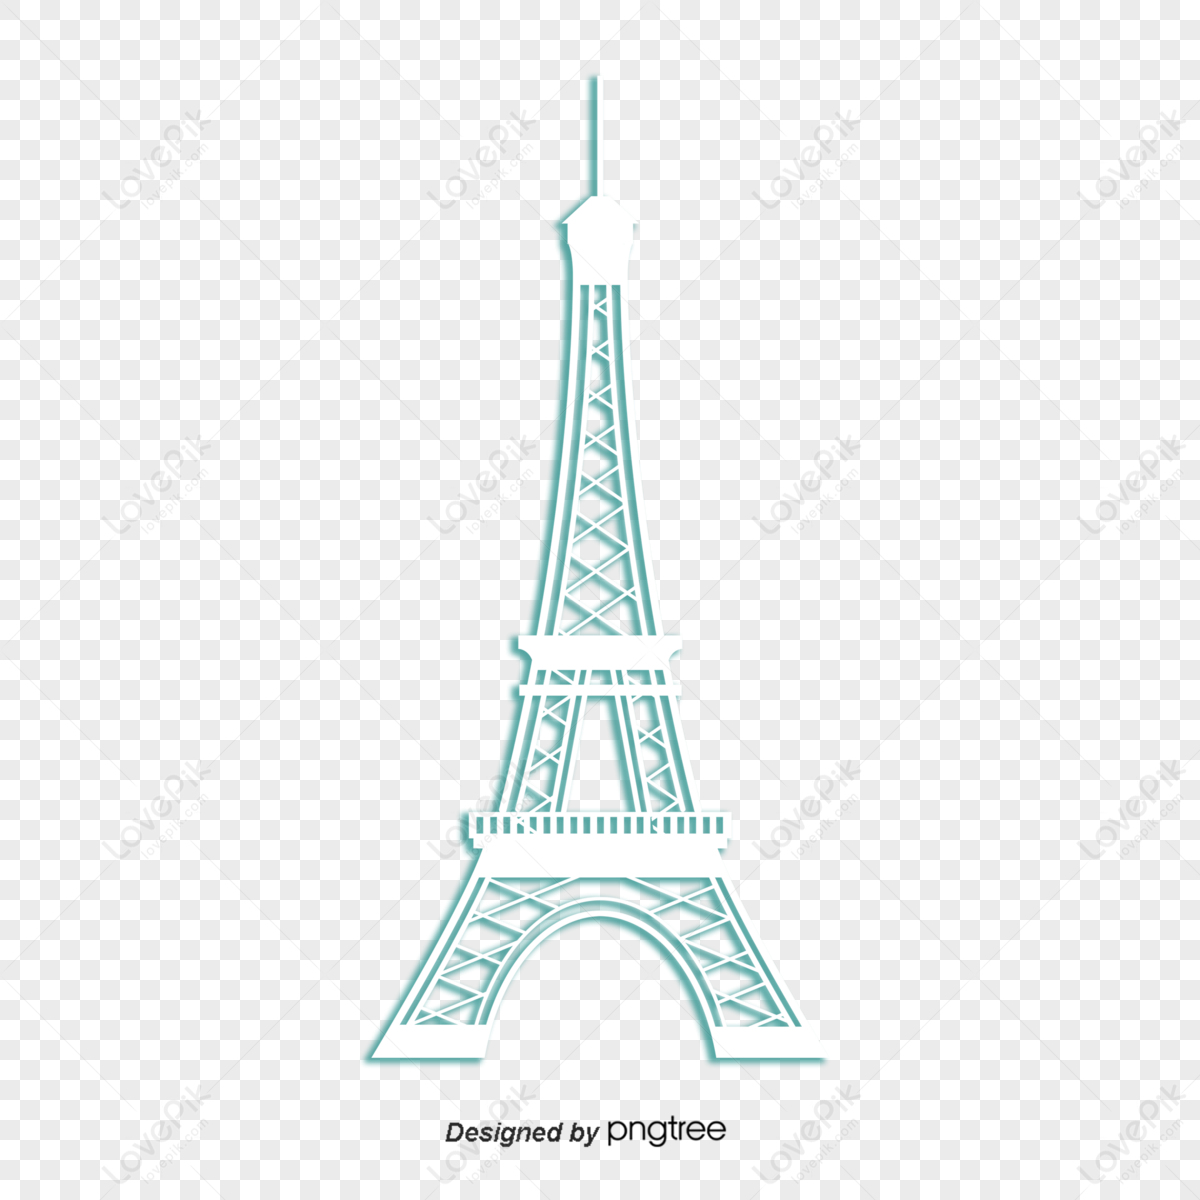 Silhouette of Eiffel Tower in Paris France,scenic spot,scenic spots png transparent image